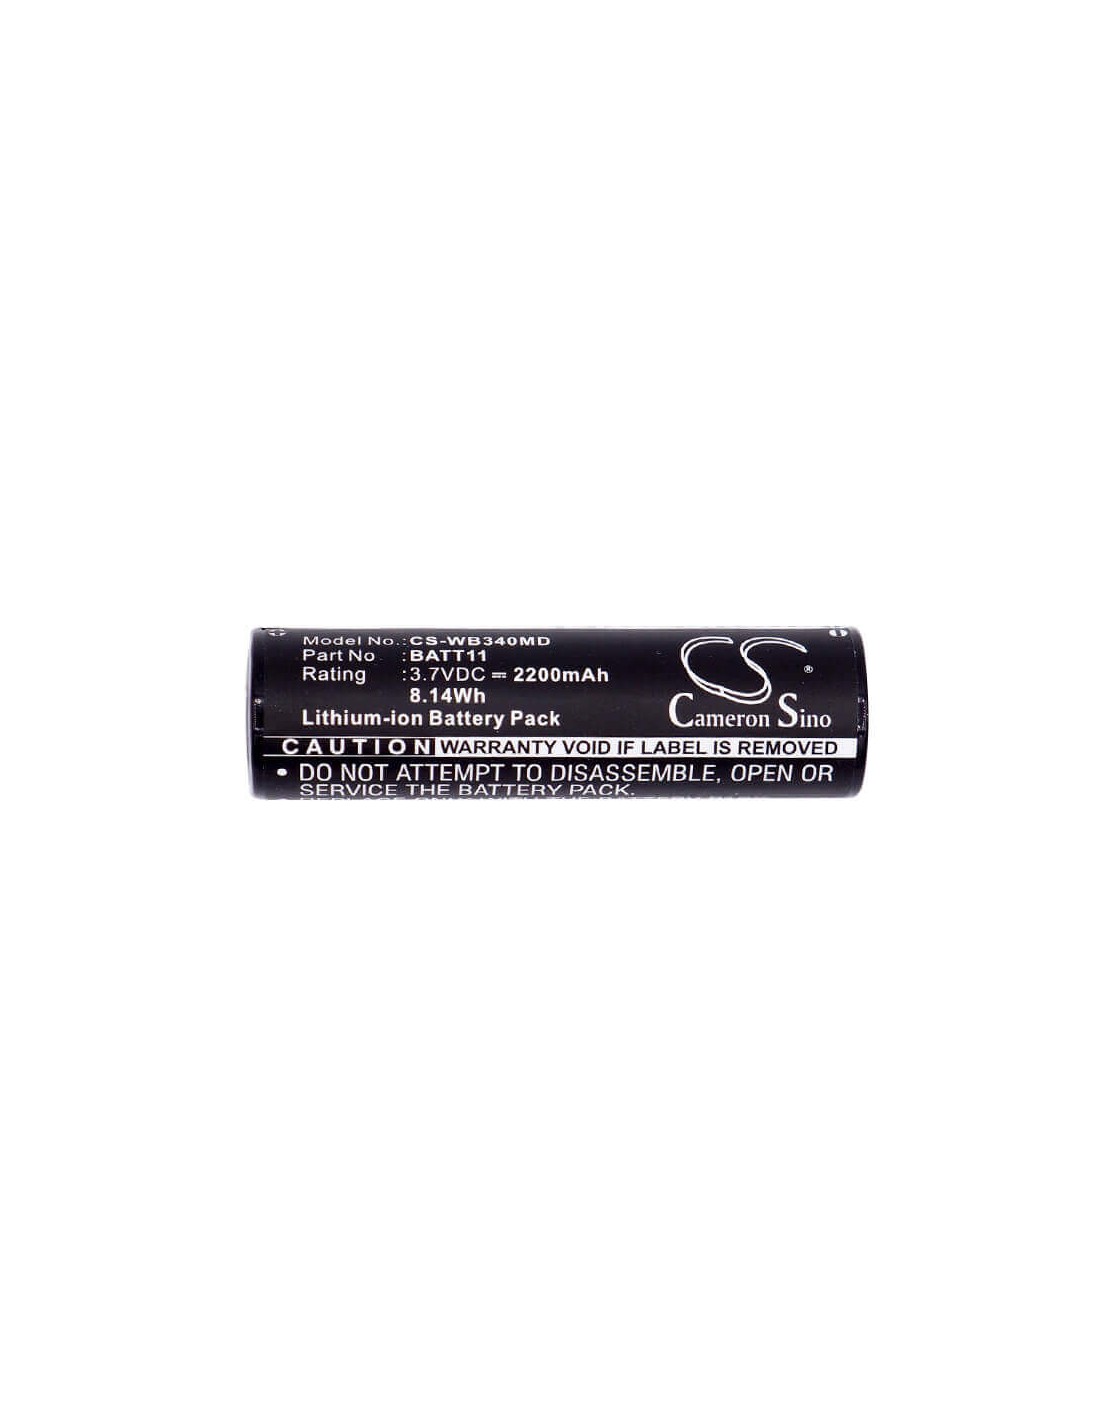 Battery for Welch-allyn, Connex Probp 3400, Connex Probp 3400 Pro Bp 3.7V, 2200mAh - 8.14Wh